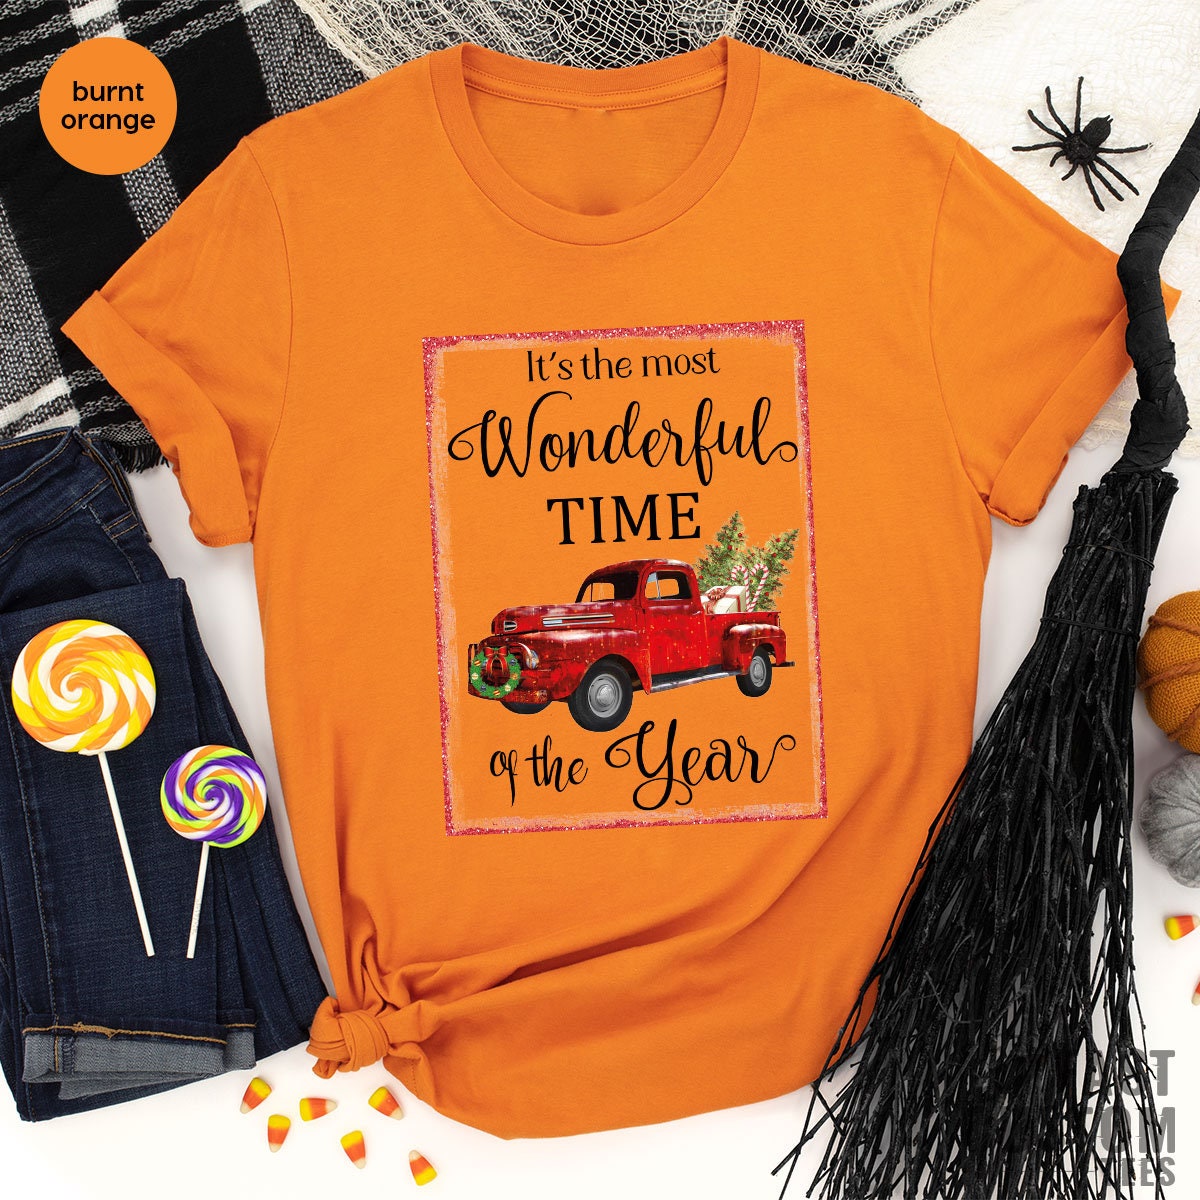 It's The Most Wonderful Time Of The Year Shirt, Christmas Truck shirt, Christmas Tree Shirt, Family Christmas Shirts, Gift For Christmas Tee - Fastdeliverytees.com